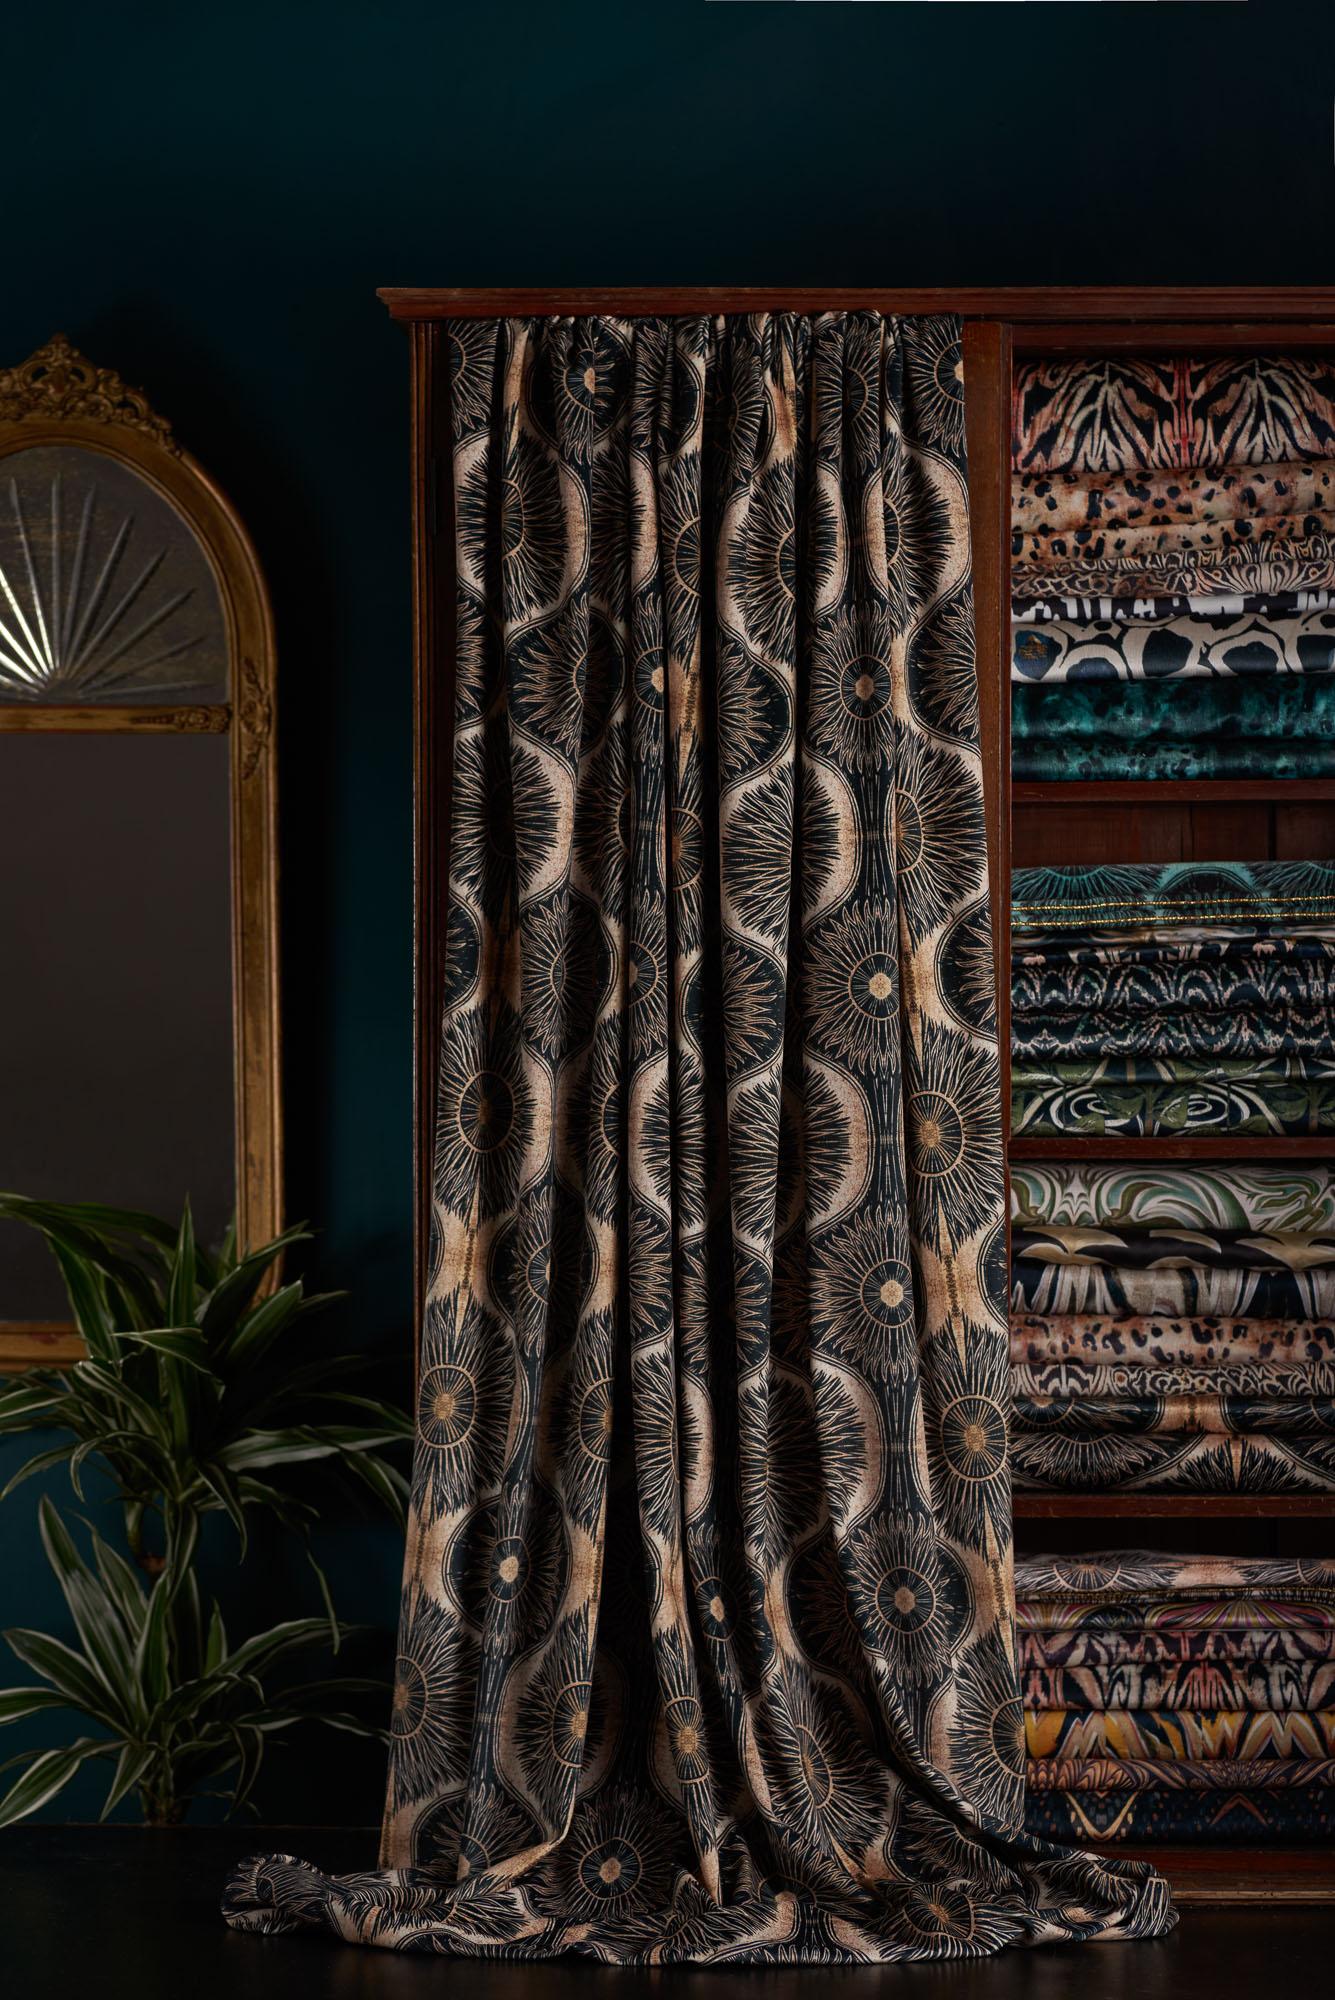 This is our most popular design – a lino print transformed into a flowing pattern in black and soft gold tones. The metallic element of the original print transfers well on to this velvet giving a soft sheen.

This velvet has a very different handle